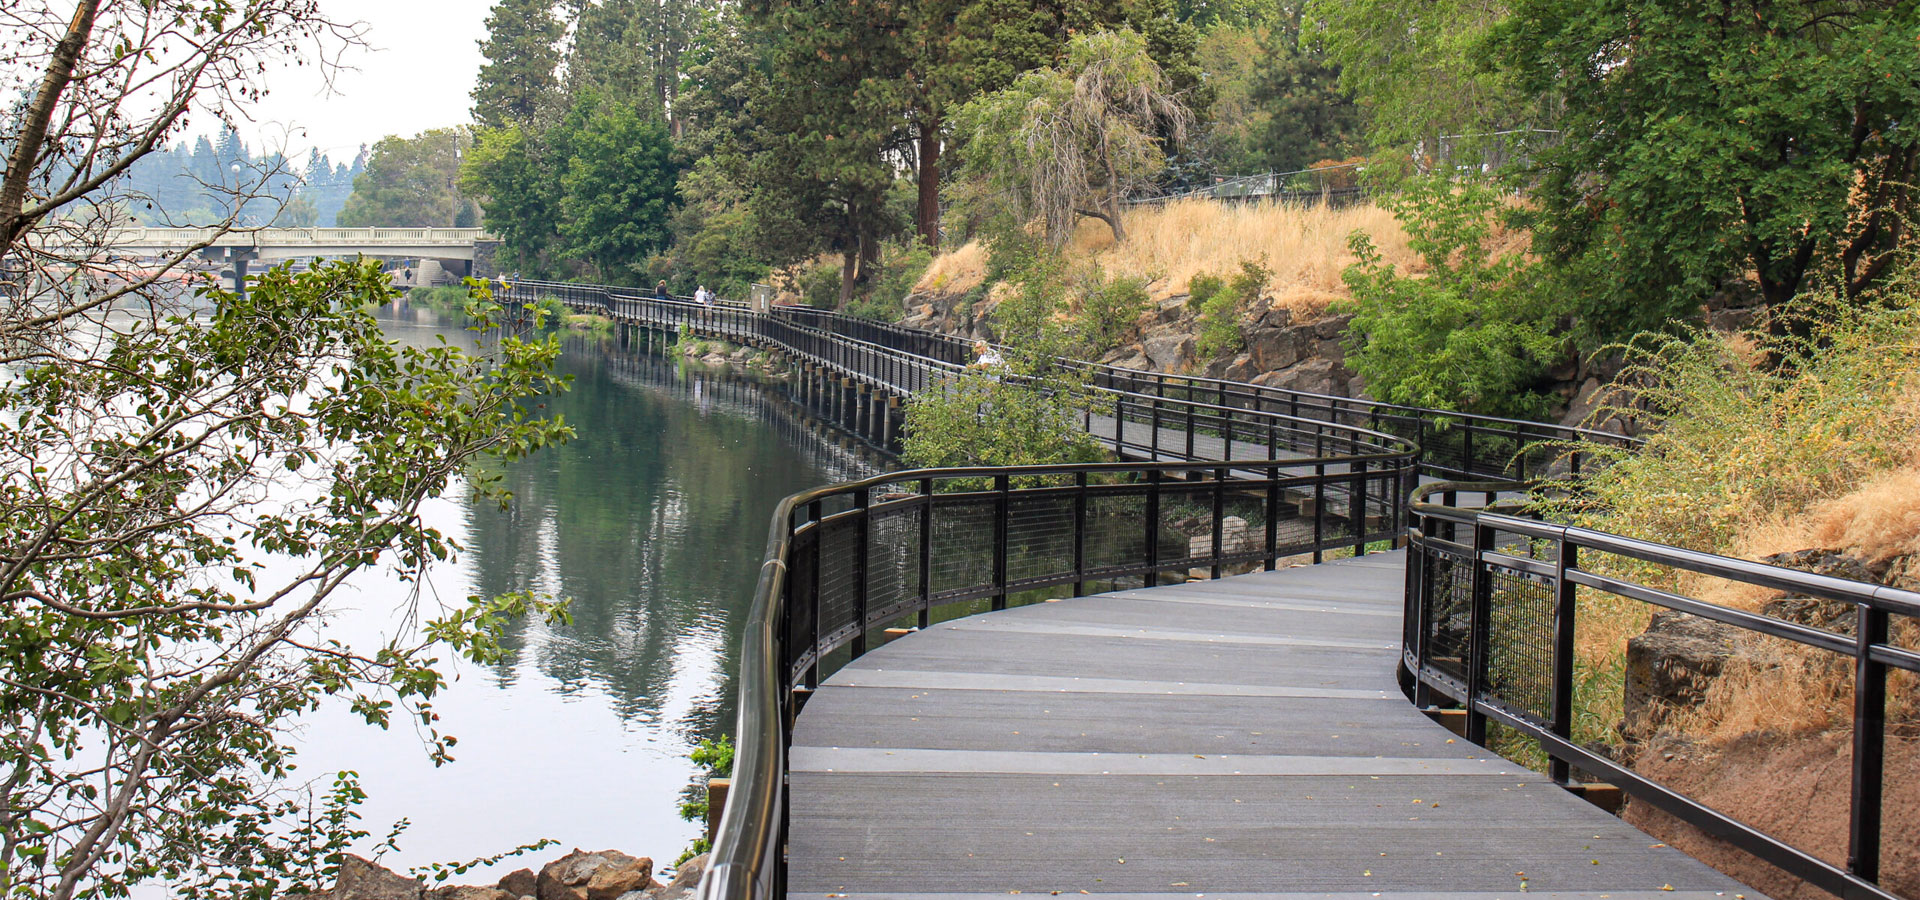 Drake park boardwalk along the Deschutes river with Newport Ave bridge in the distance